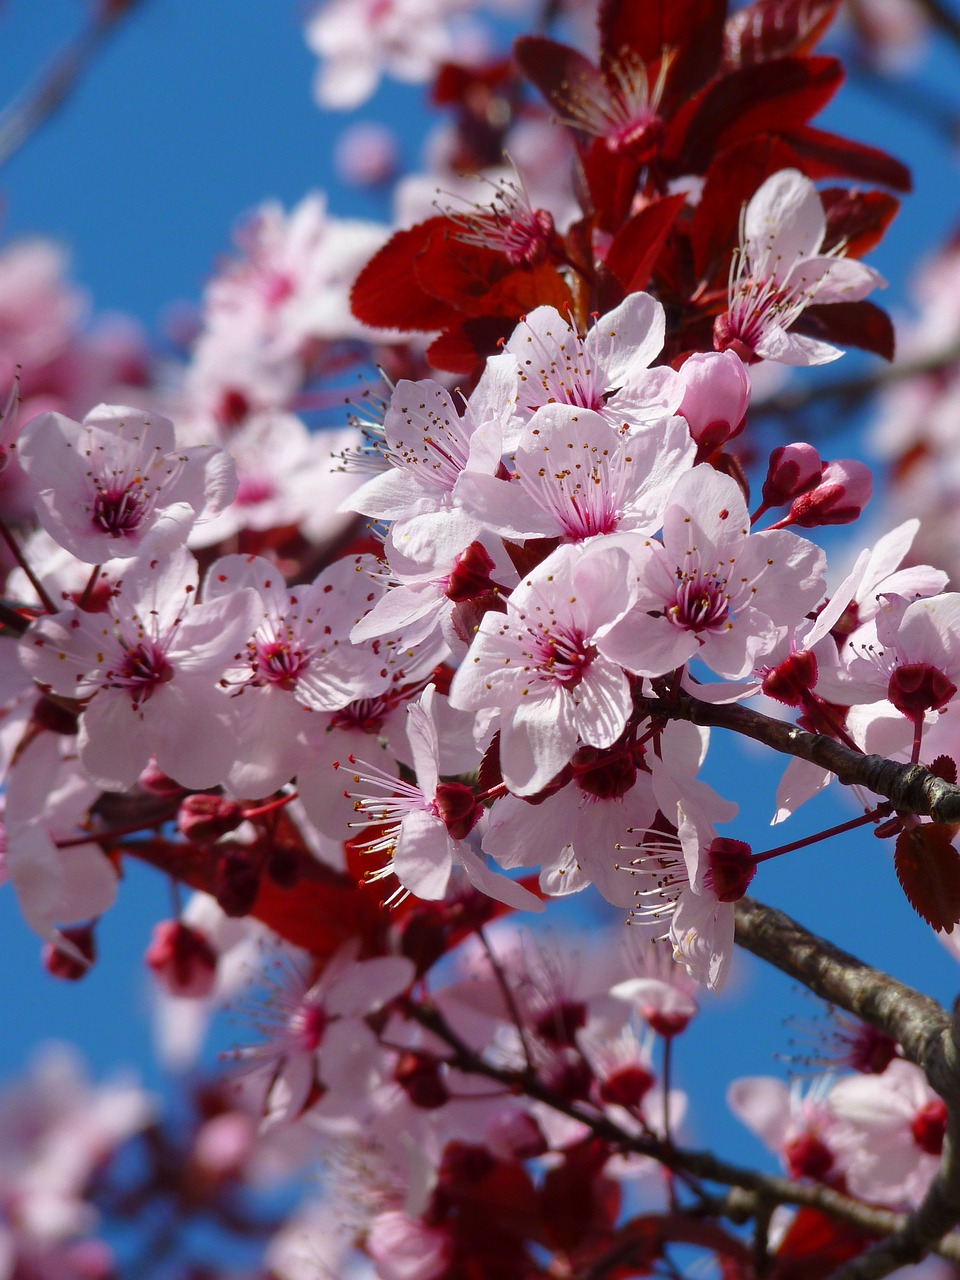 A close view of flowering cherry blossoms with delicate pink petals and prominent stamens against a deep blue sky.